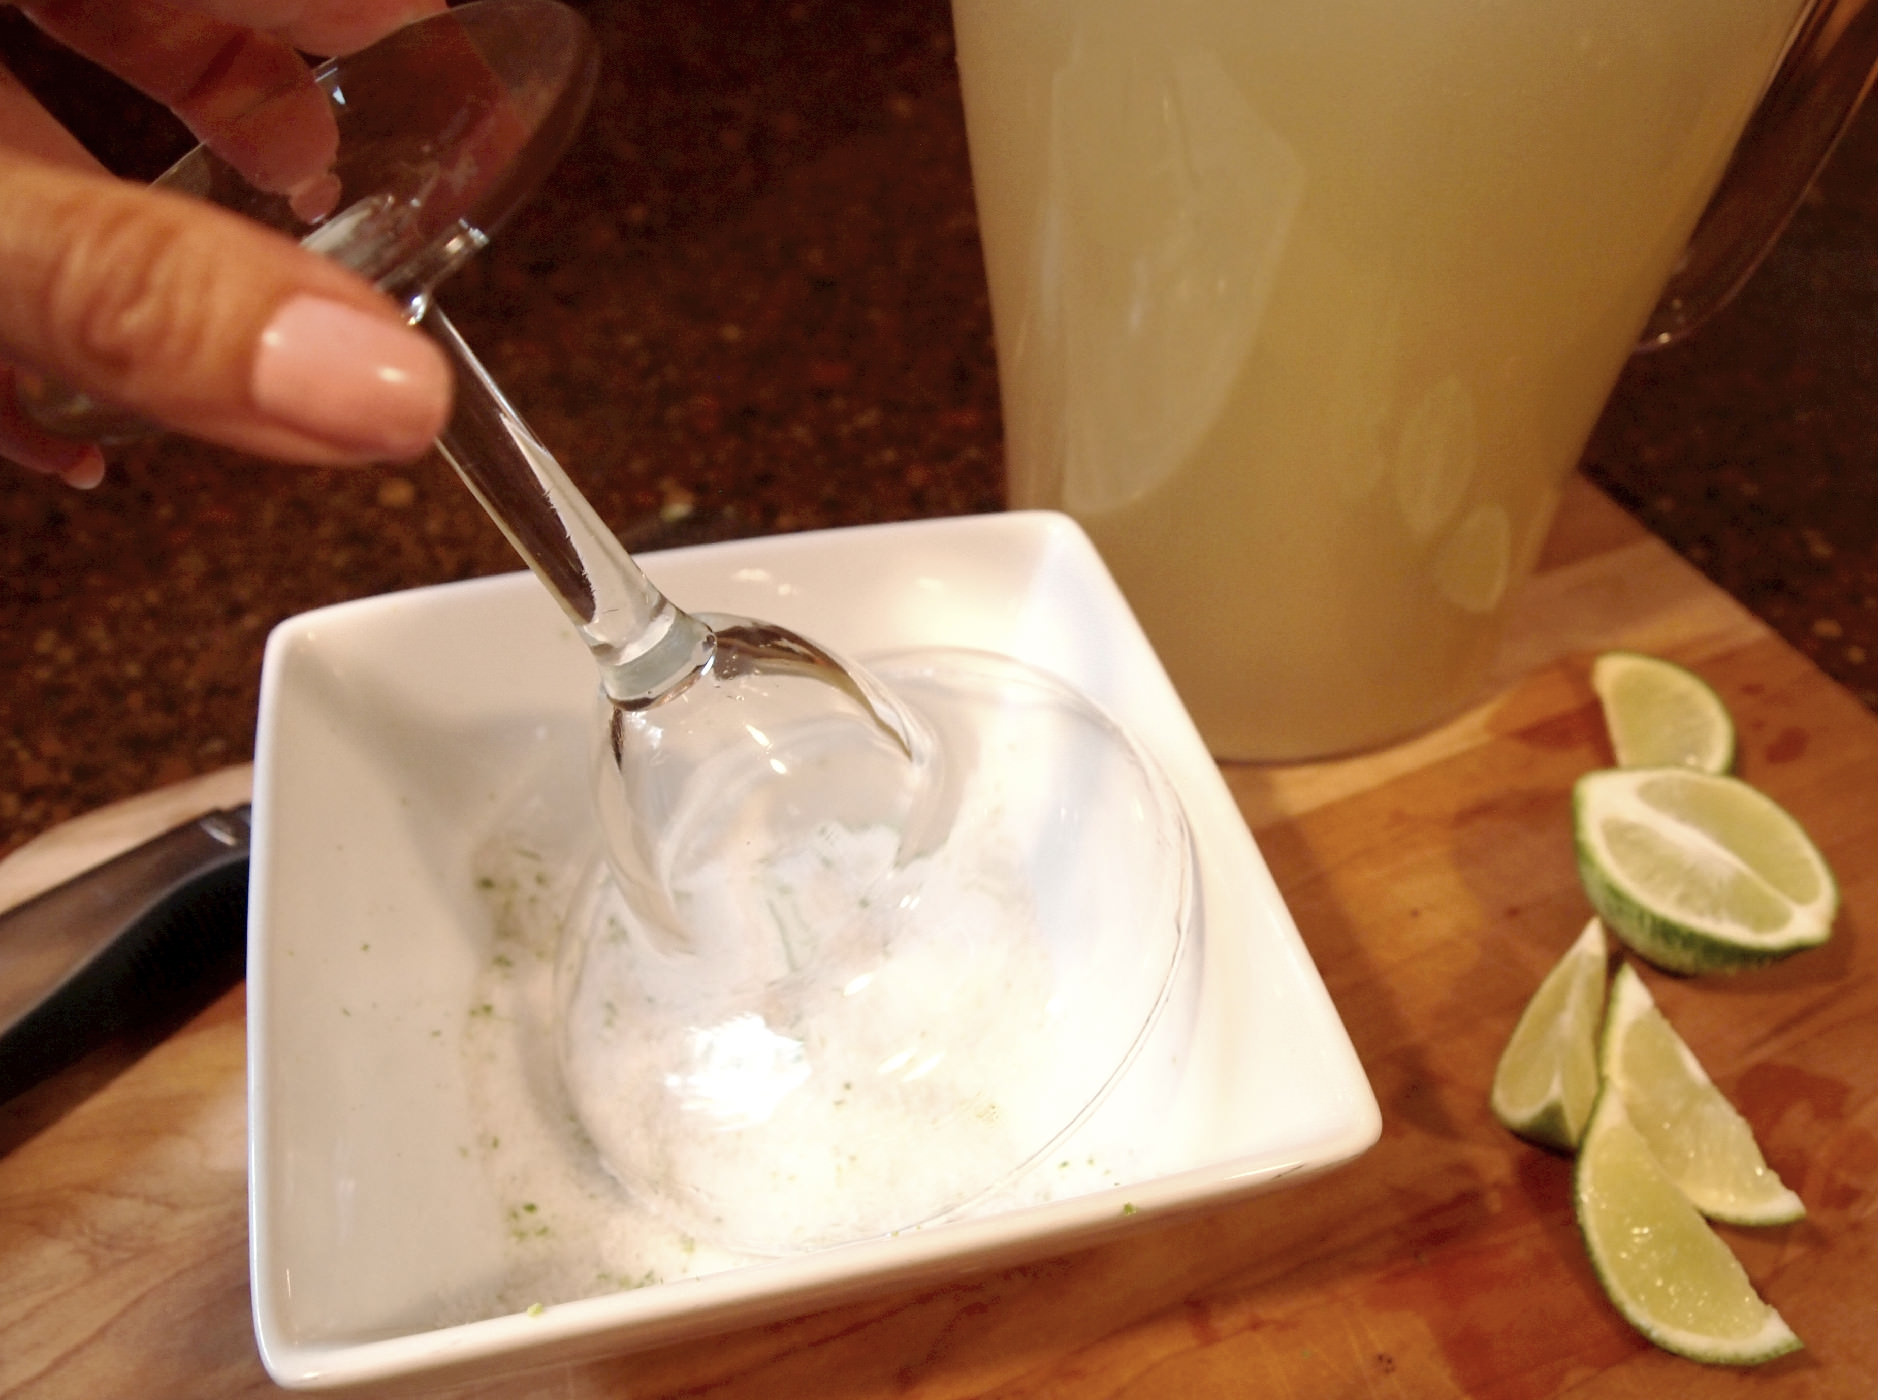 Salting the rim of a glass for a margartia